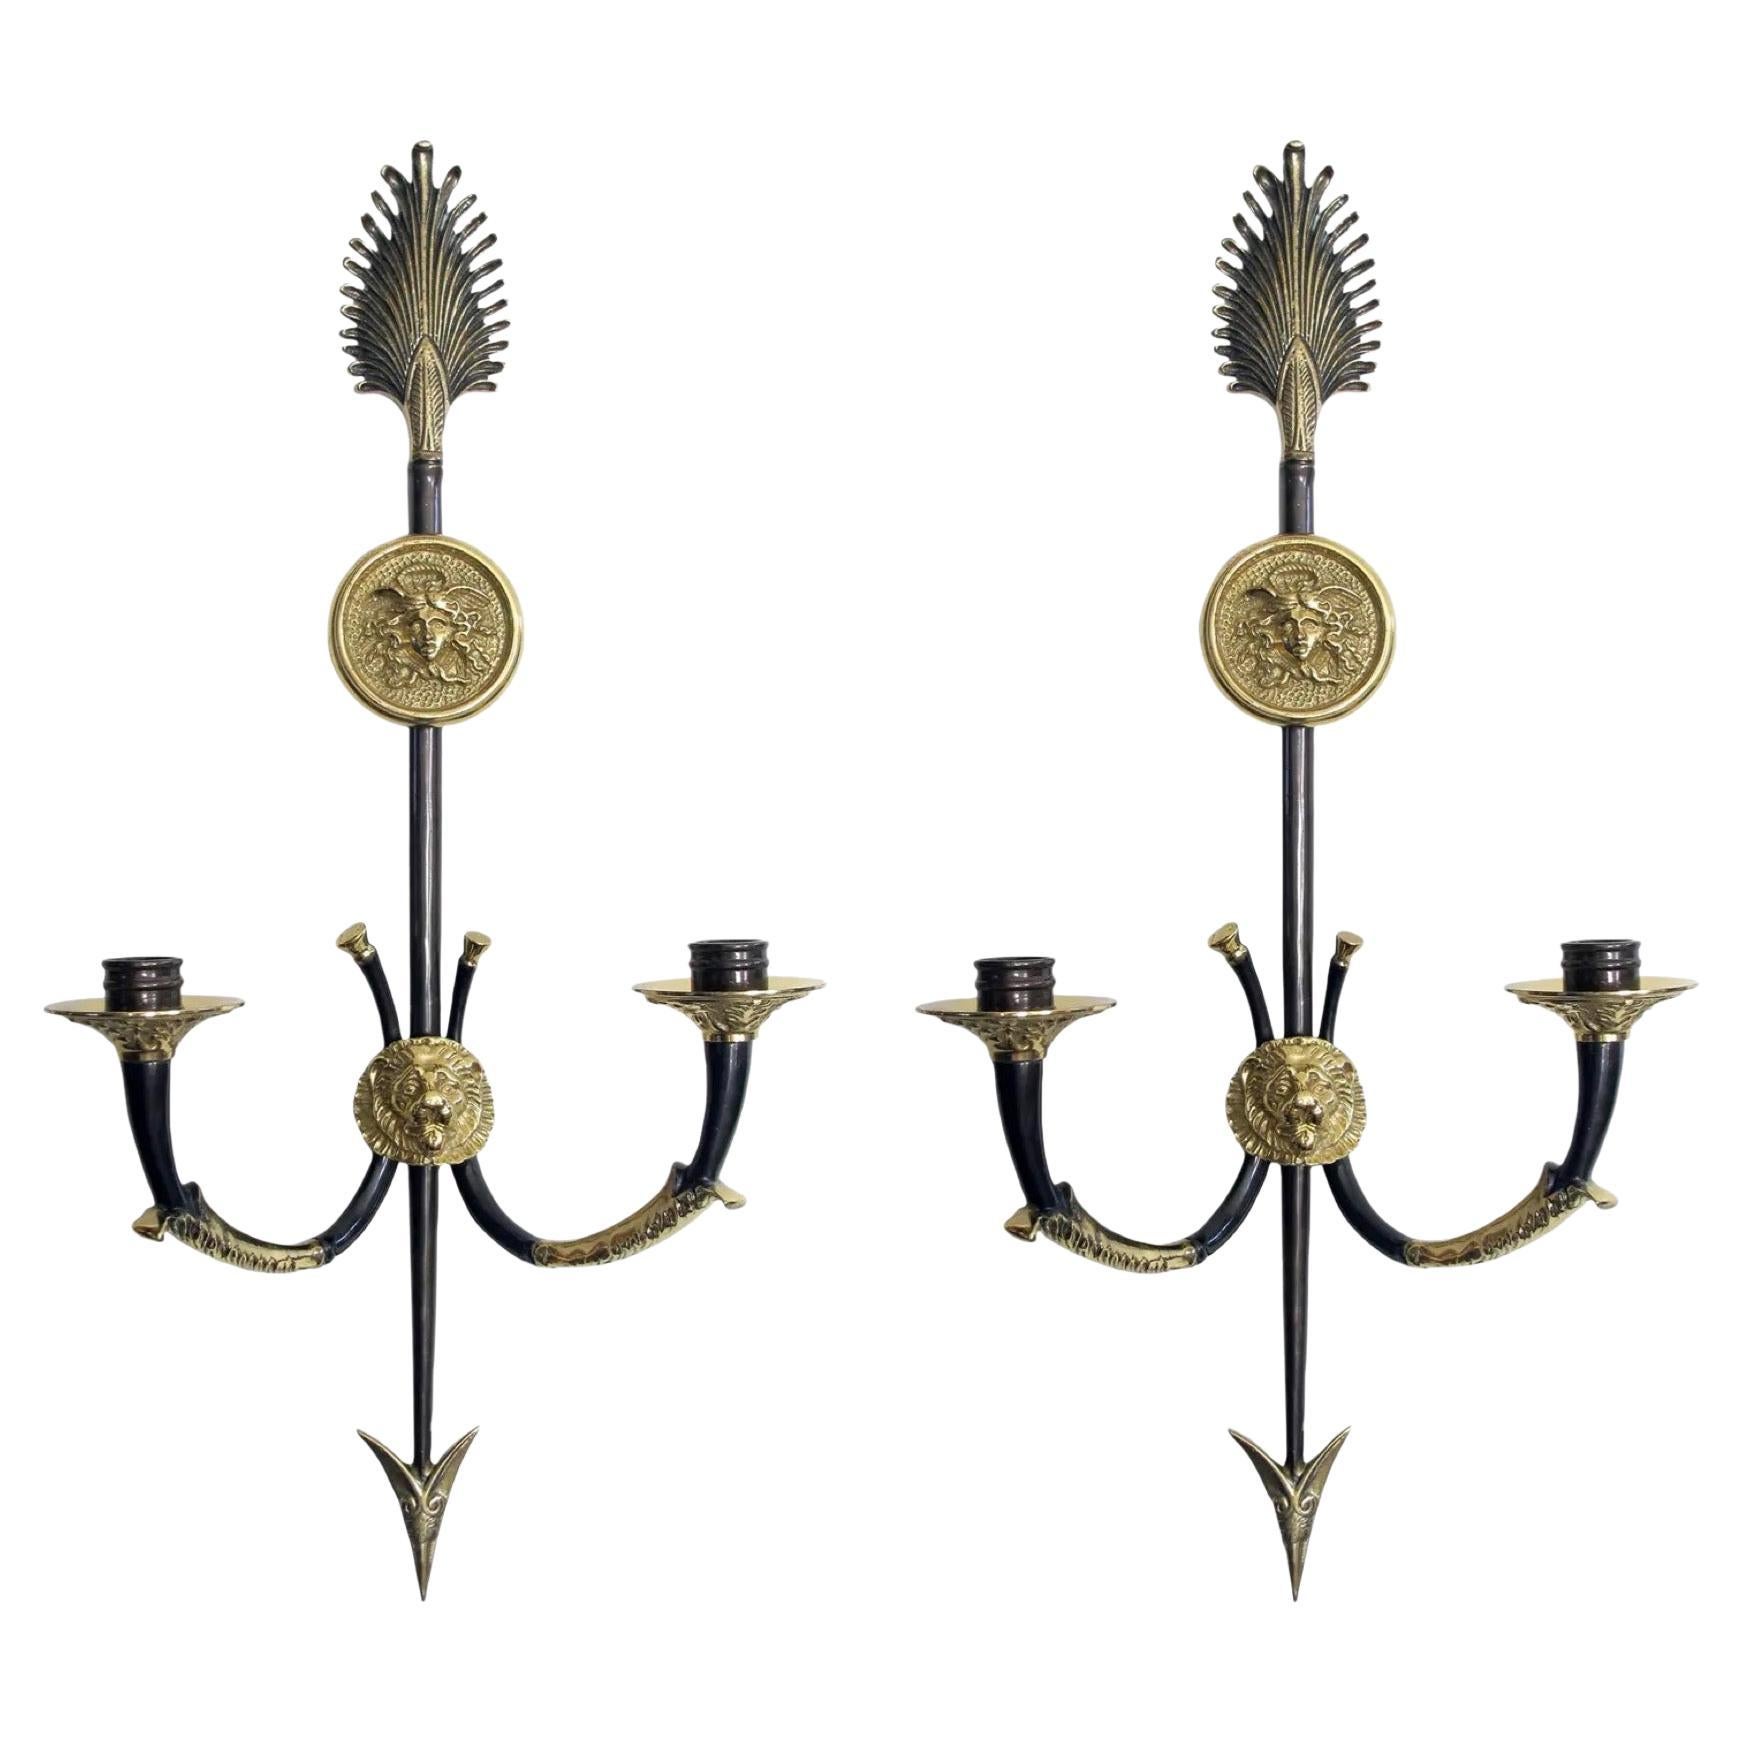 Pair Decorative Crafts Inc. Neoclassical Brass Two Arm Candle Sconces 